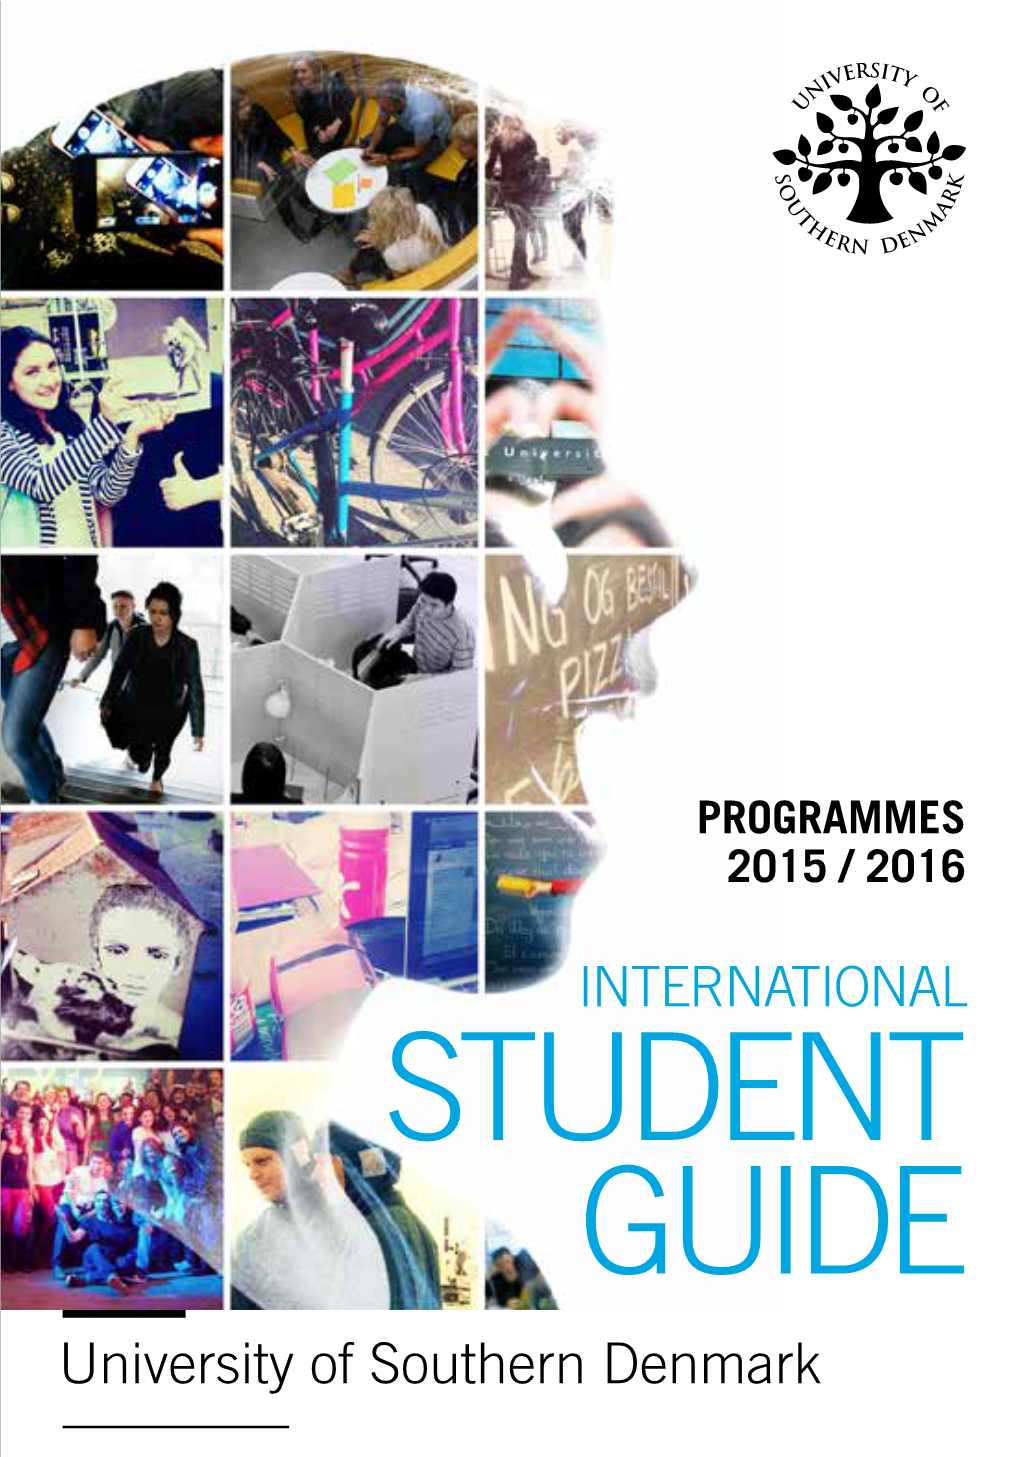 Student Guide 2015 / 2016 the European Union